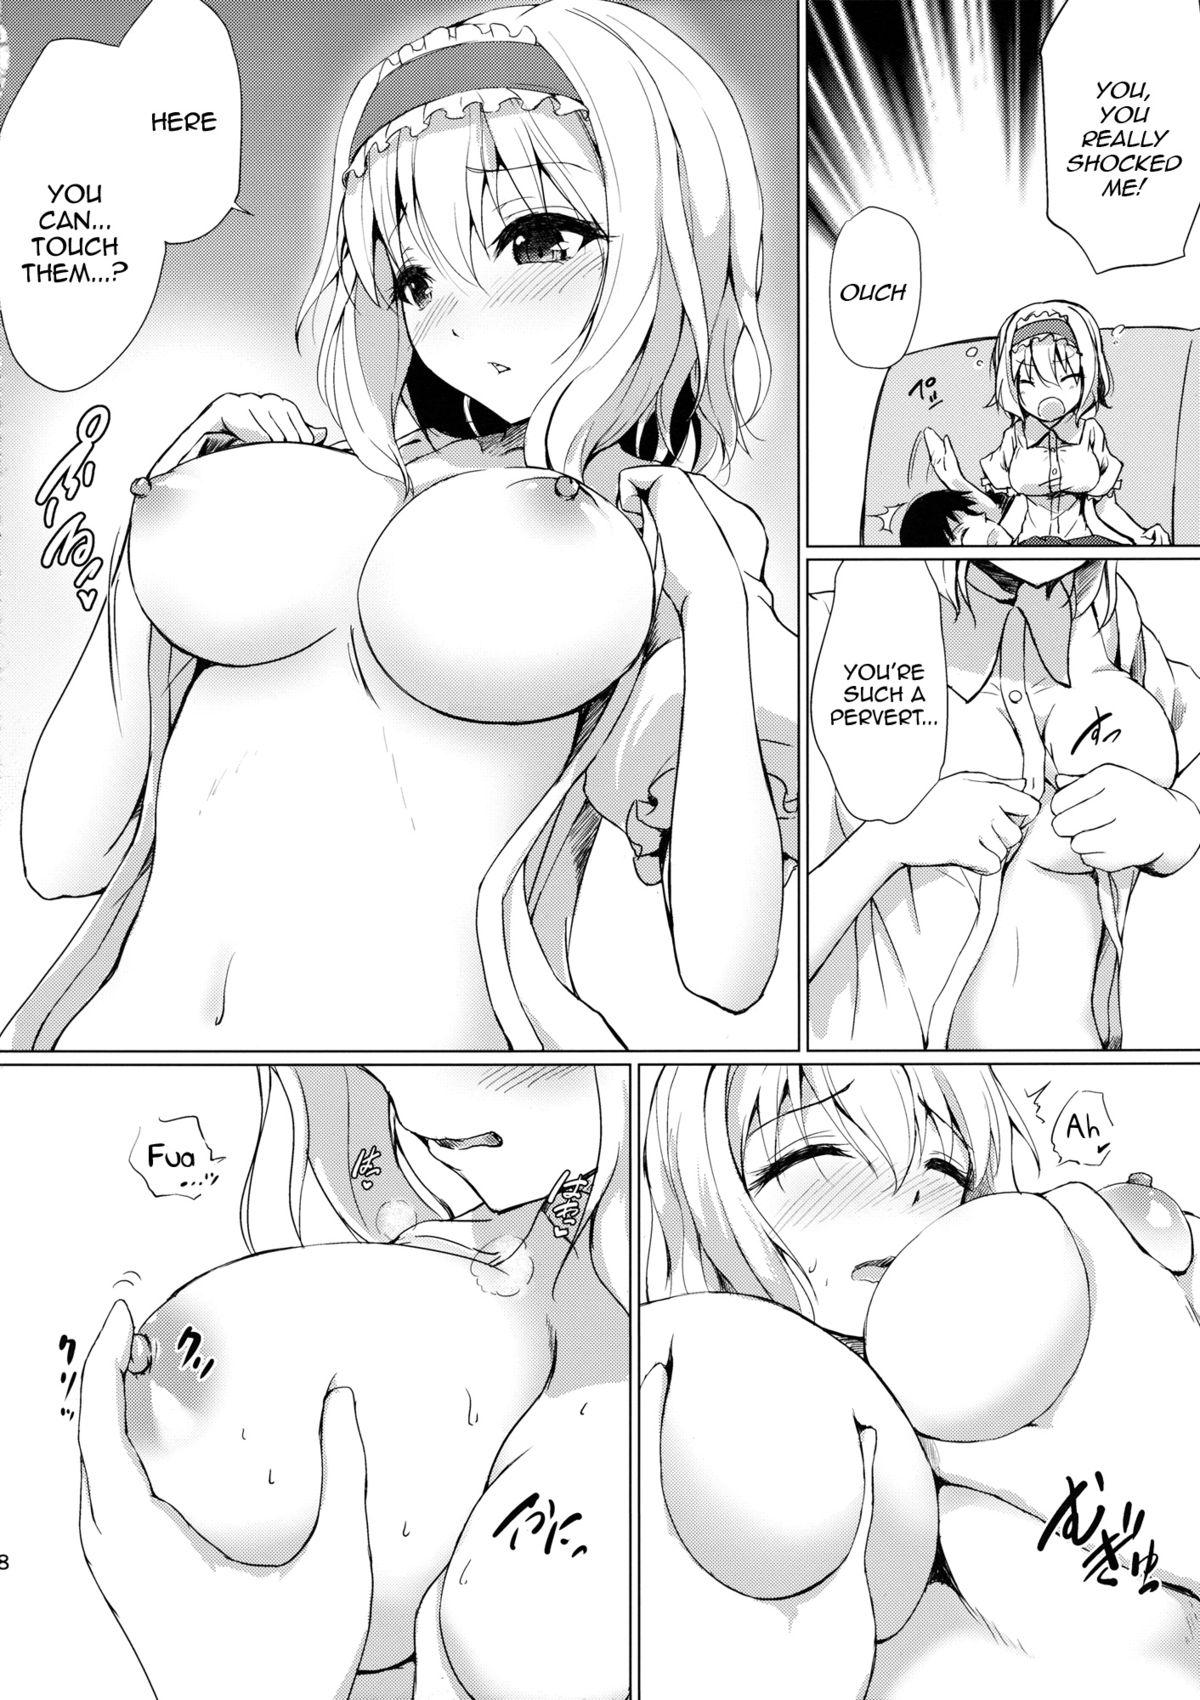 Best Blowjobs Ever Call me, "Alice"! - Touhou project Private - Page 7